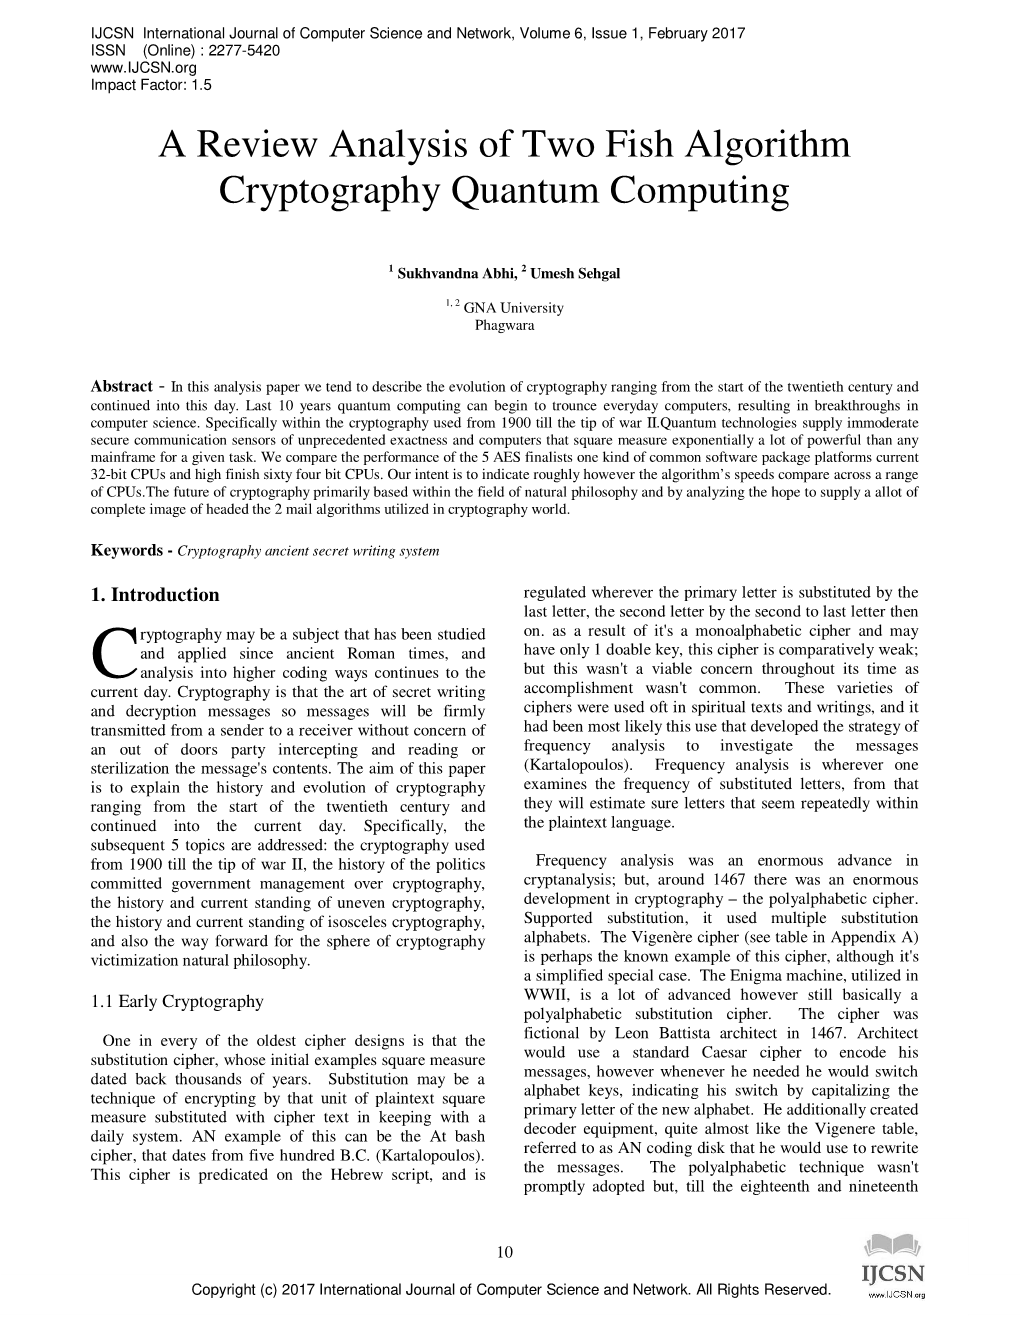 A Review Analysis of Two Fish Algorithm Cryptography Quantum Computing